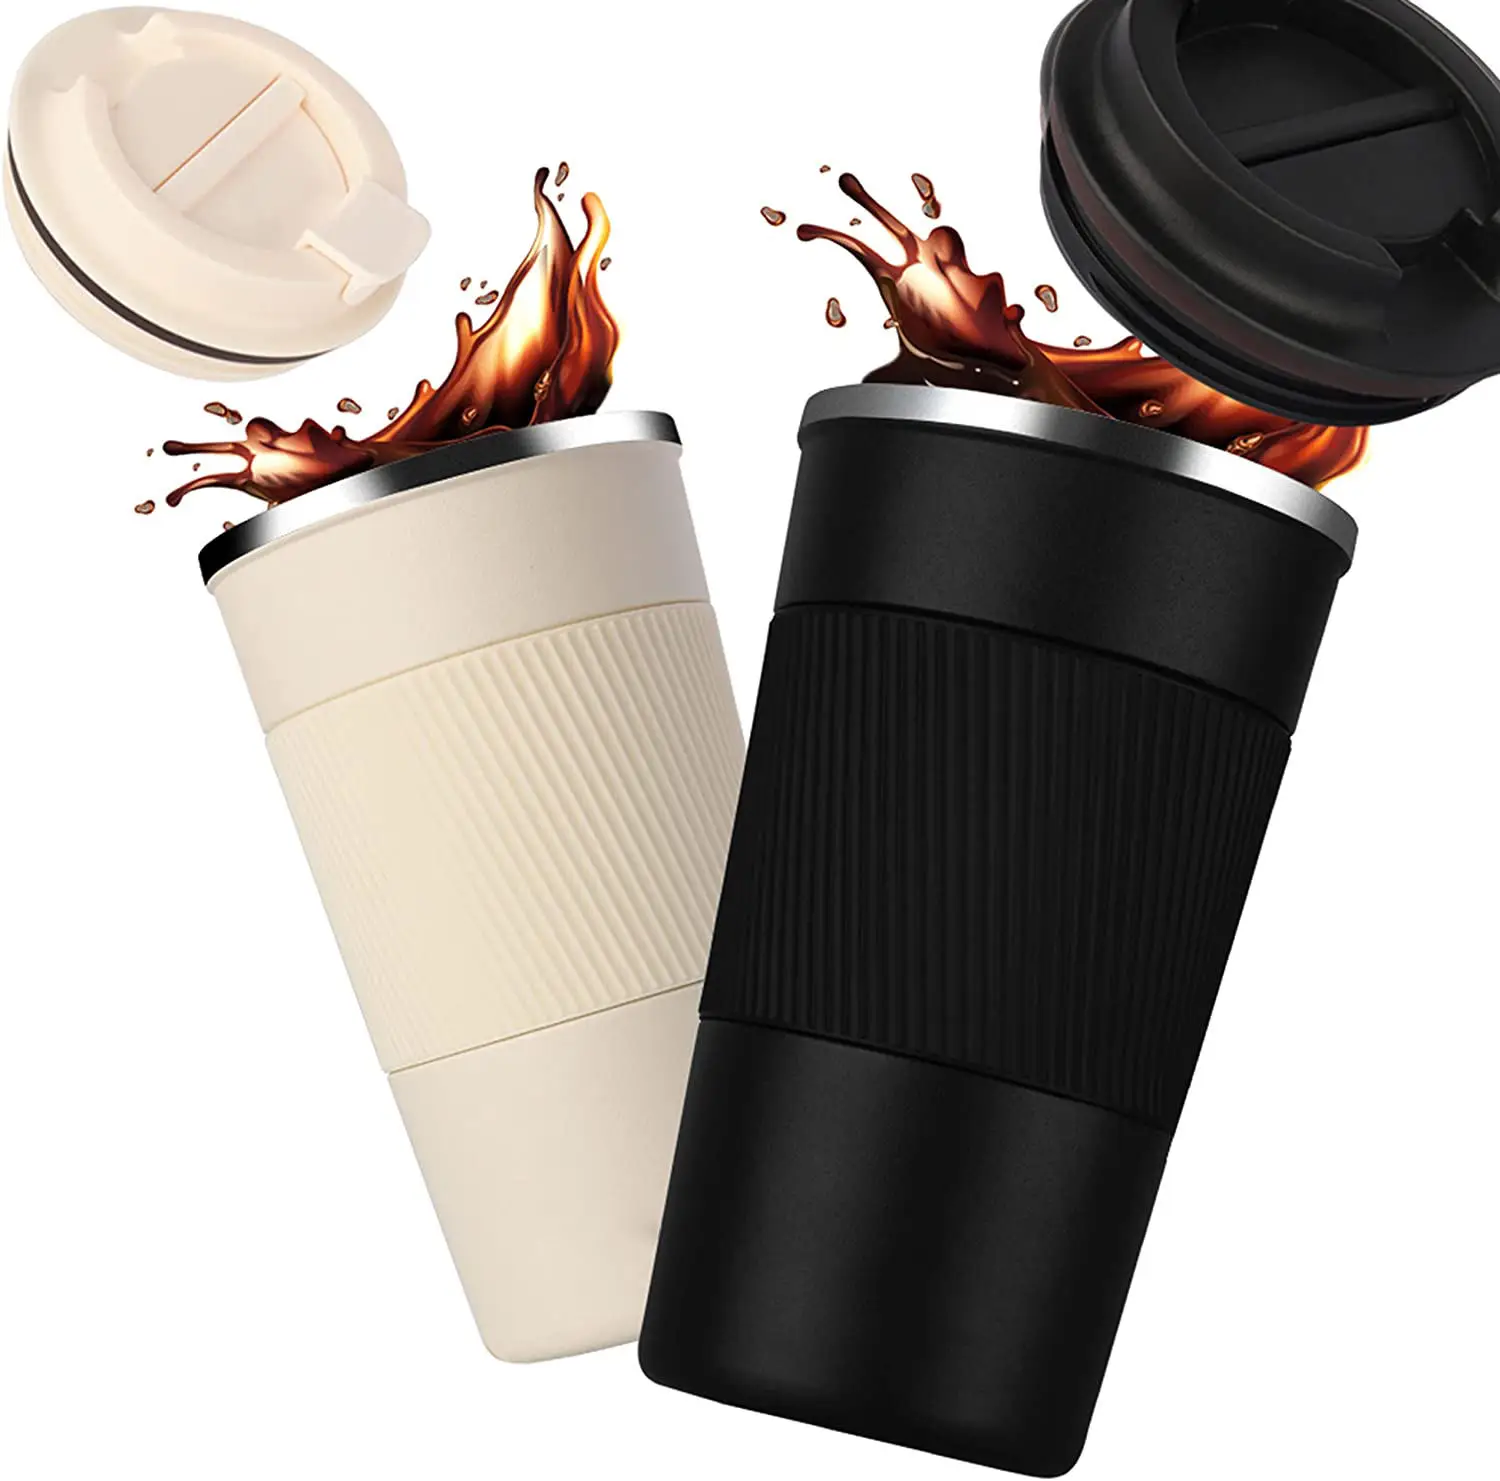 Wholesale 12oz 16oz Powder Coated Coffee Cup Double Wall Stainless Steel Thermos Travel Mugs wtih Lid Vulcanus